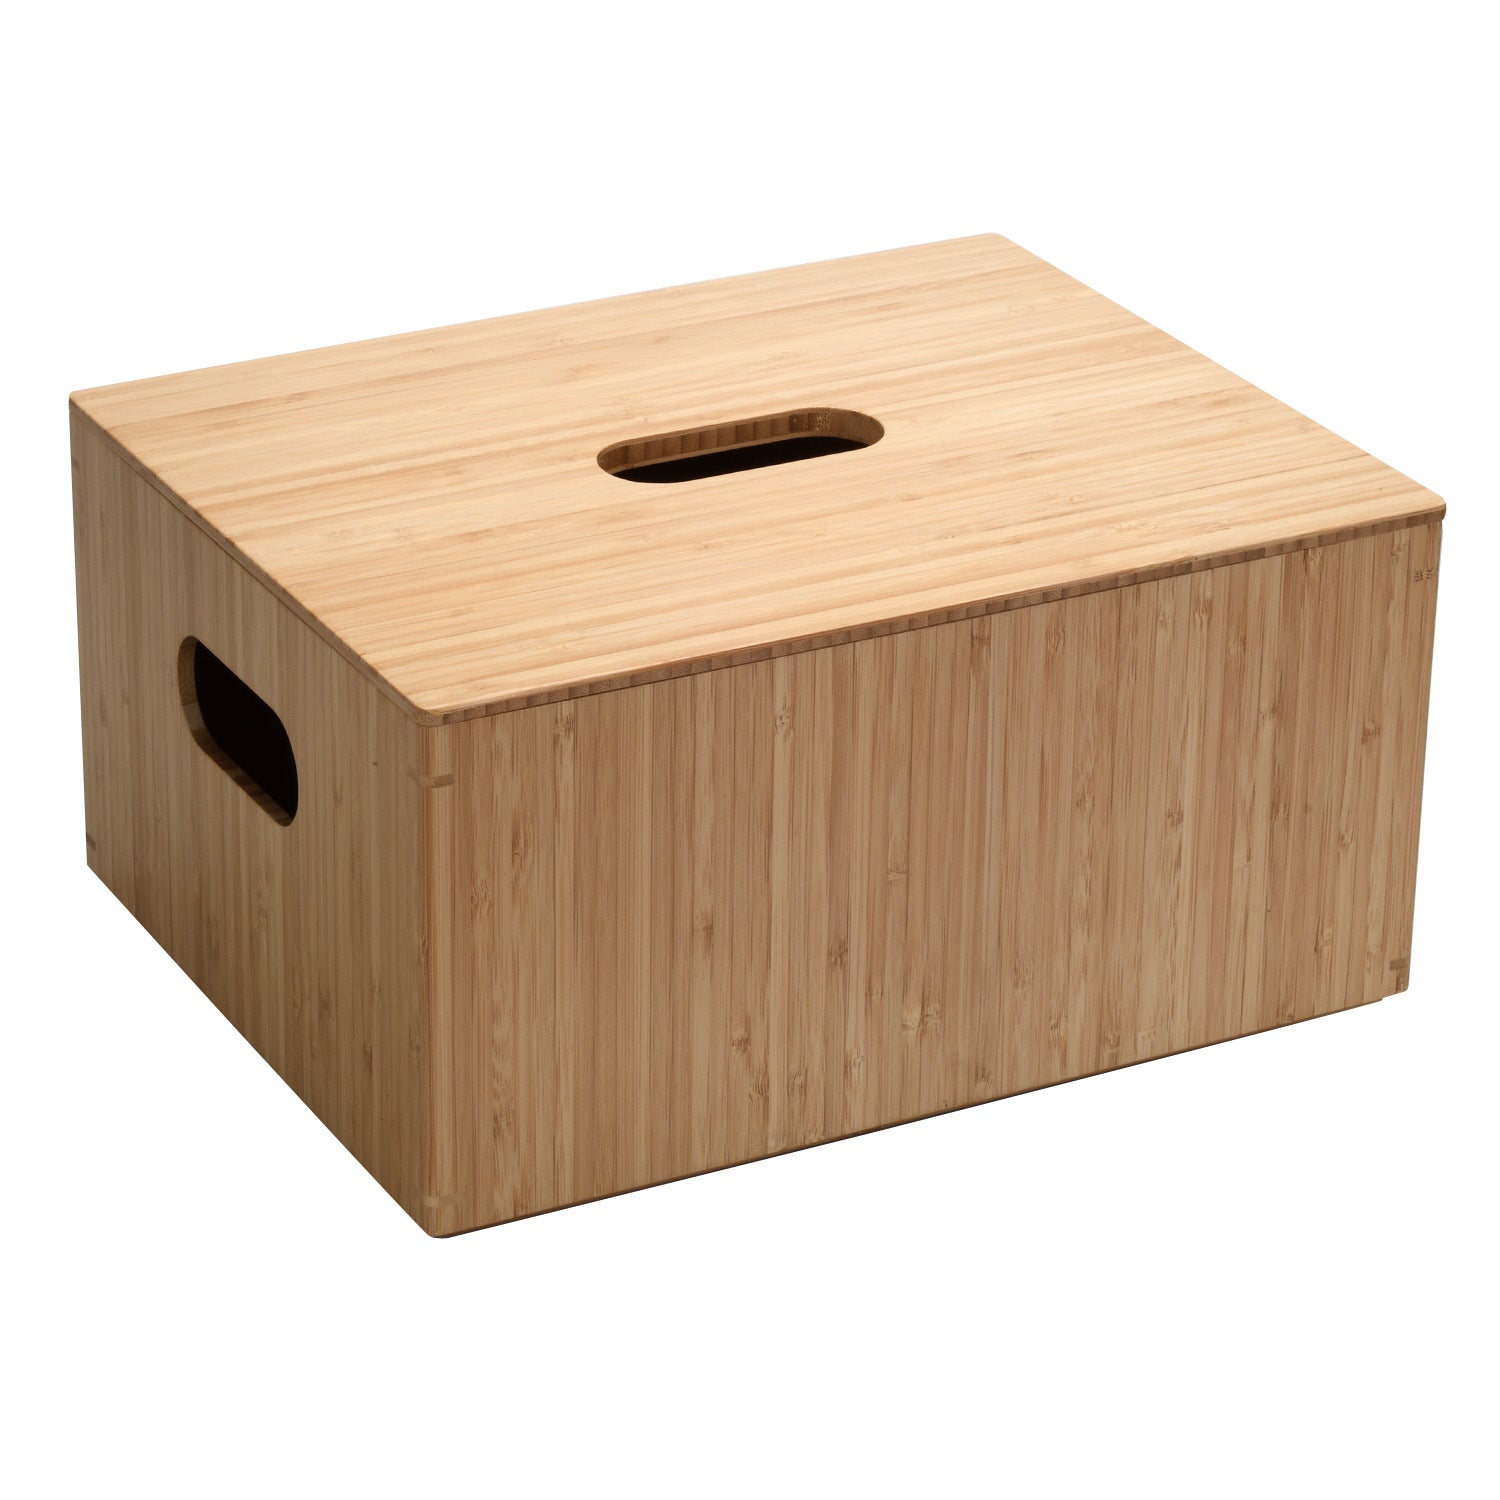 Mobilevision Bamboo Storage Box Plus Lid Combo, 14x11x 6.5, Durable Bin w/Handles, for Clothes, Shoes, Arts & Crafts, Closet & Office Shelf